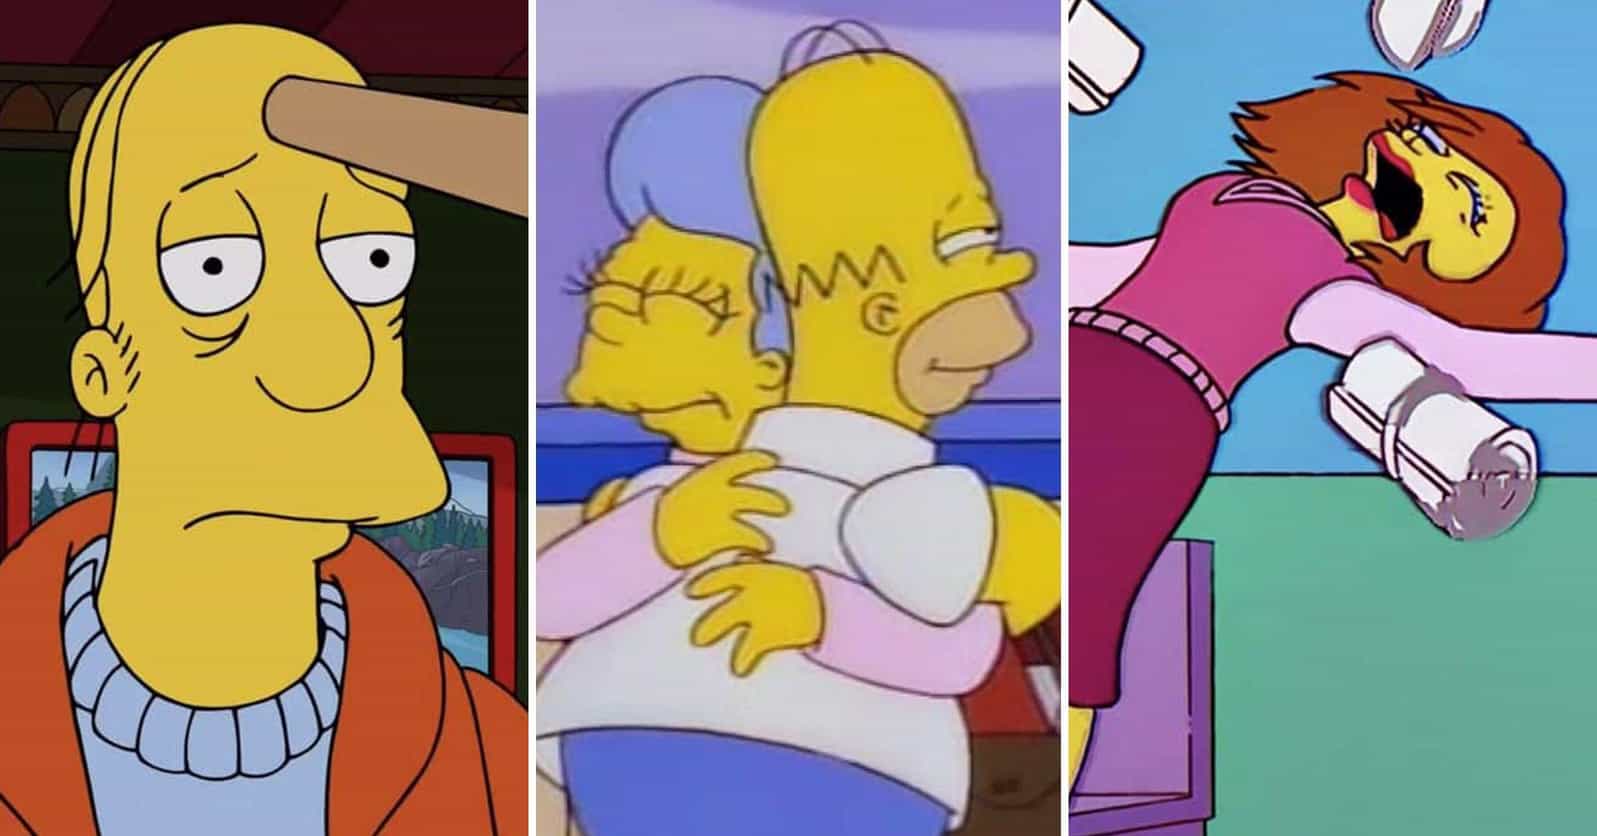 Characters 'The Simpsons' Killed Off, Ranked By How Much They'll Be Missed